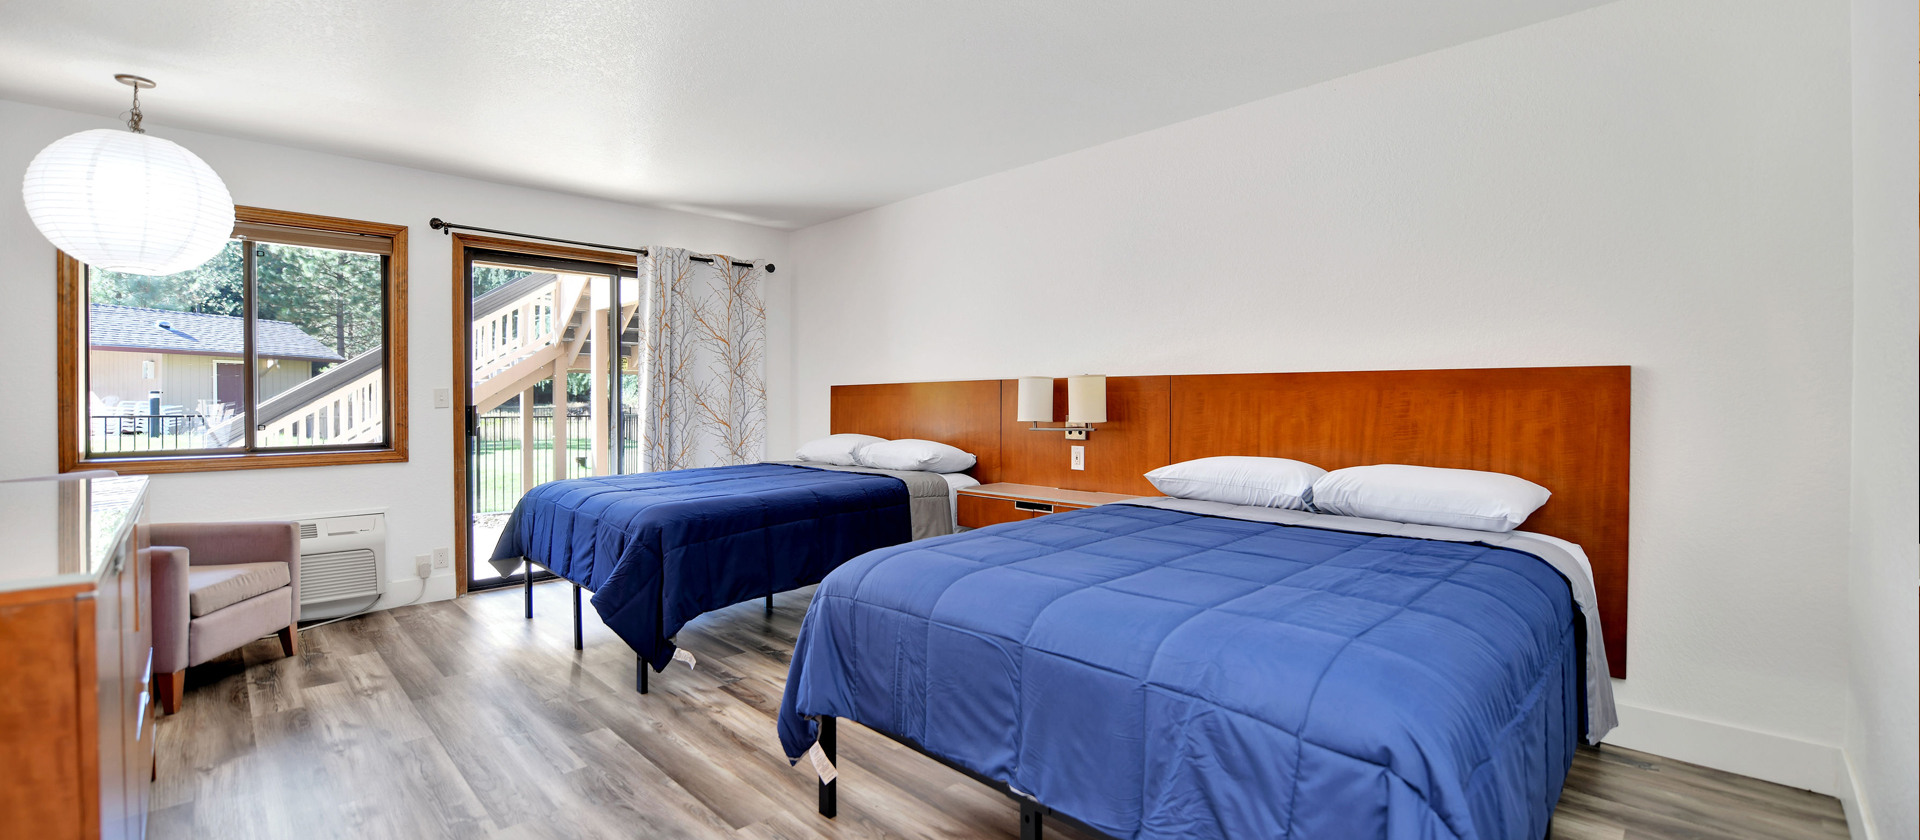 Our Spacious Family Friendly Rooms Are Perfect For Spending Quality Time